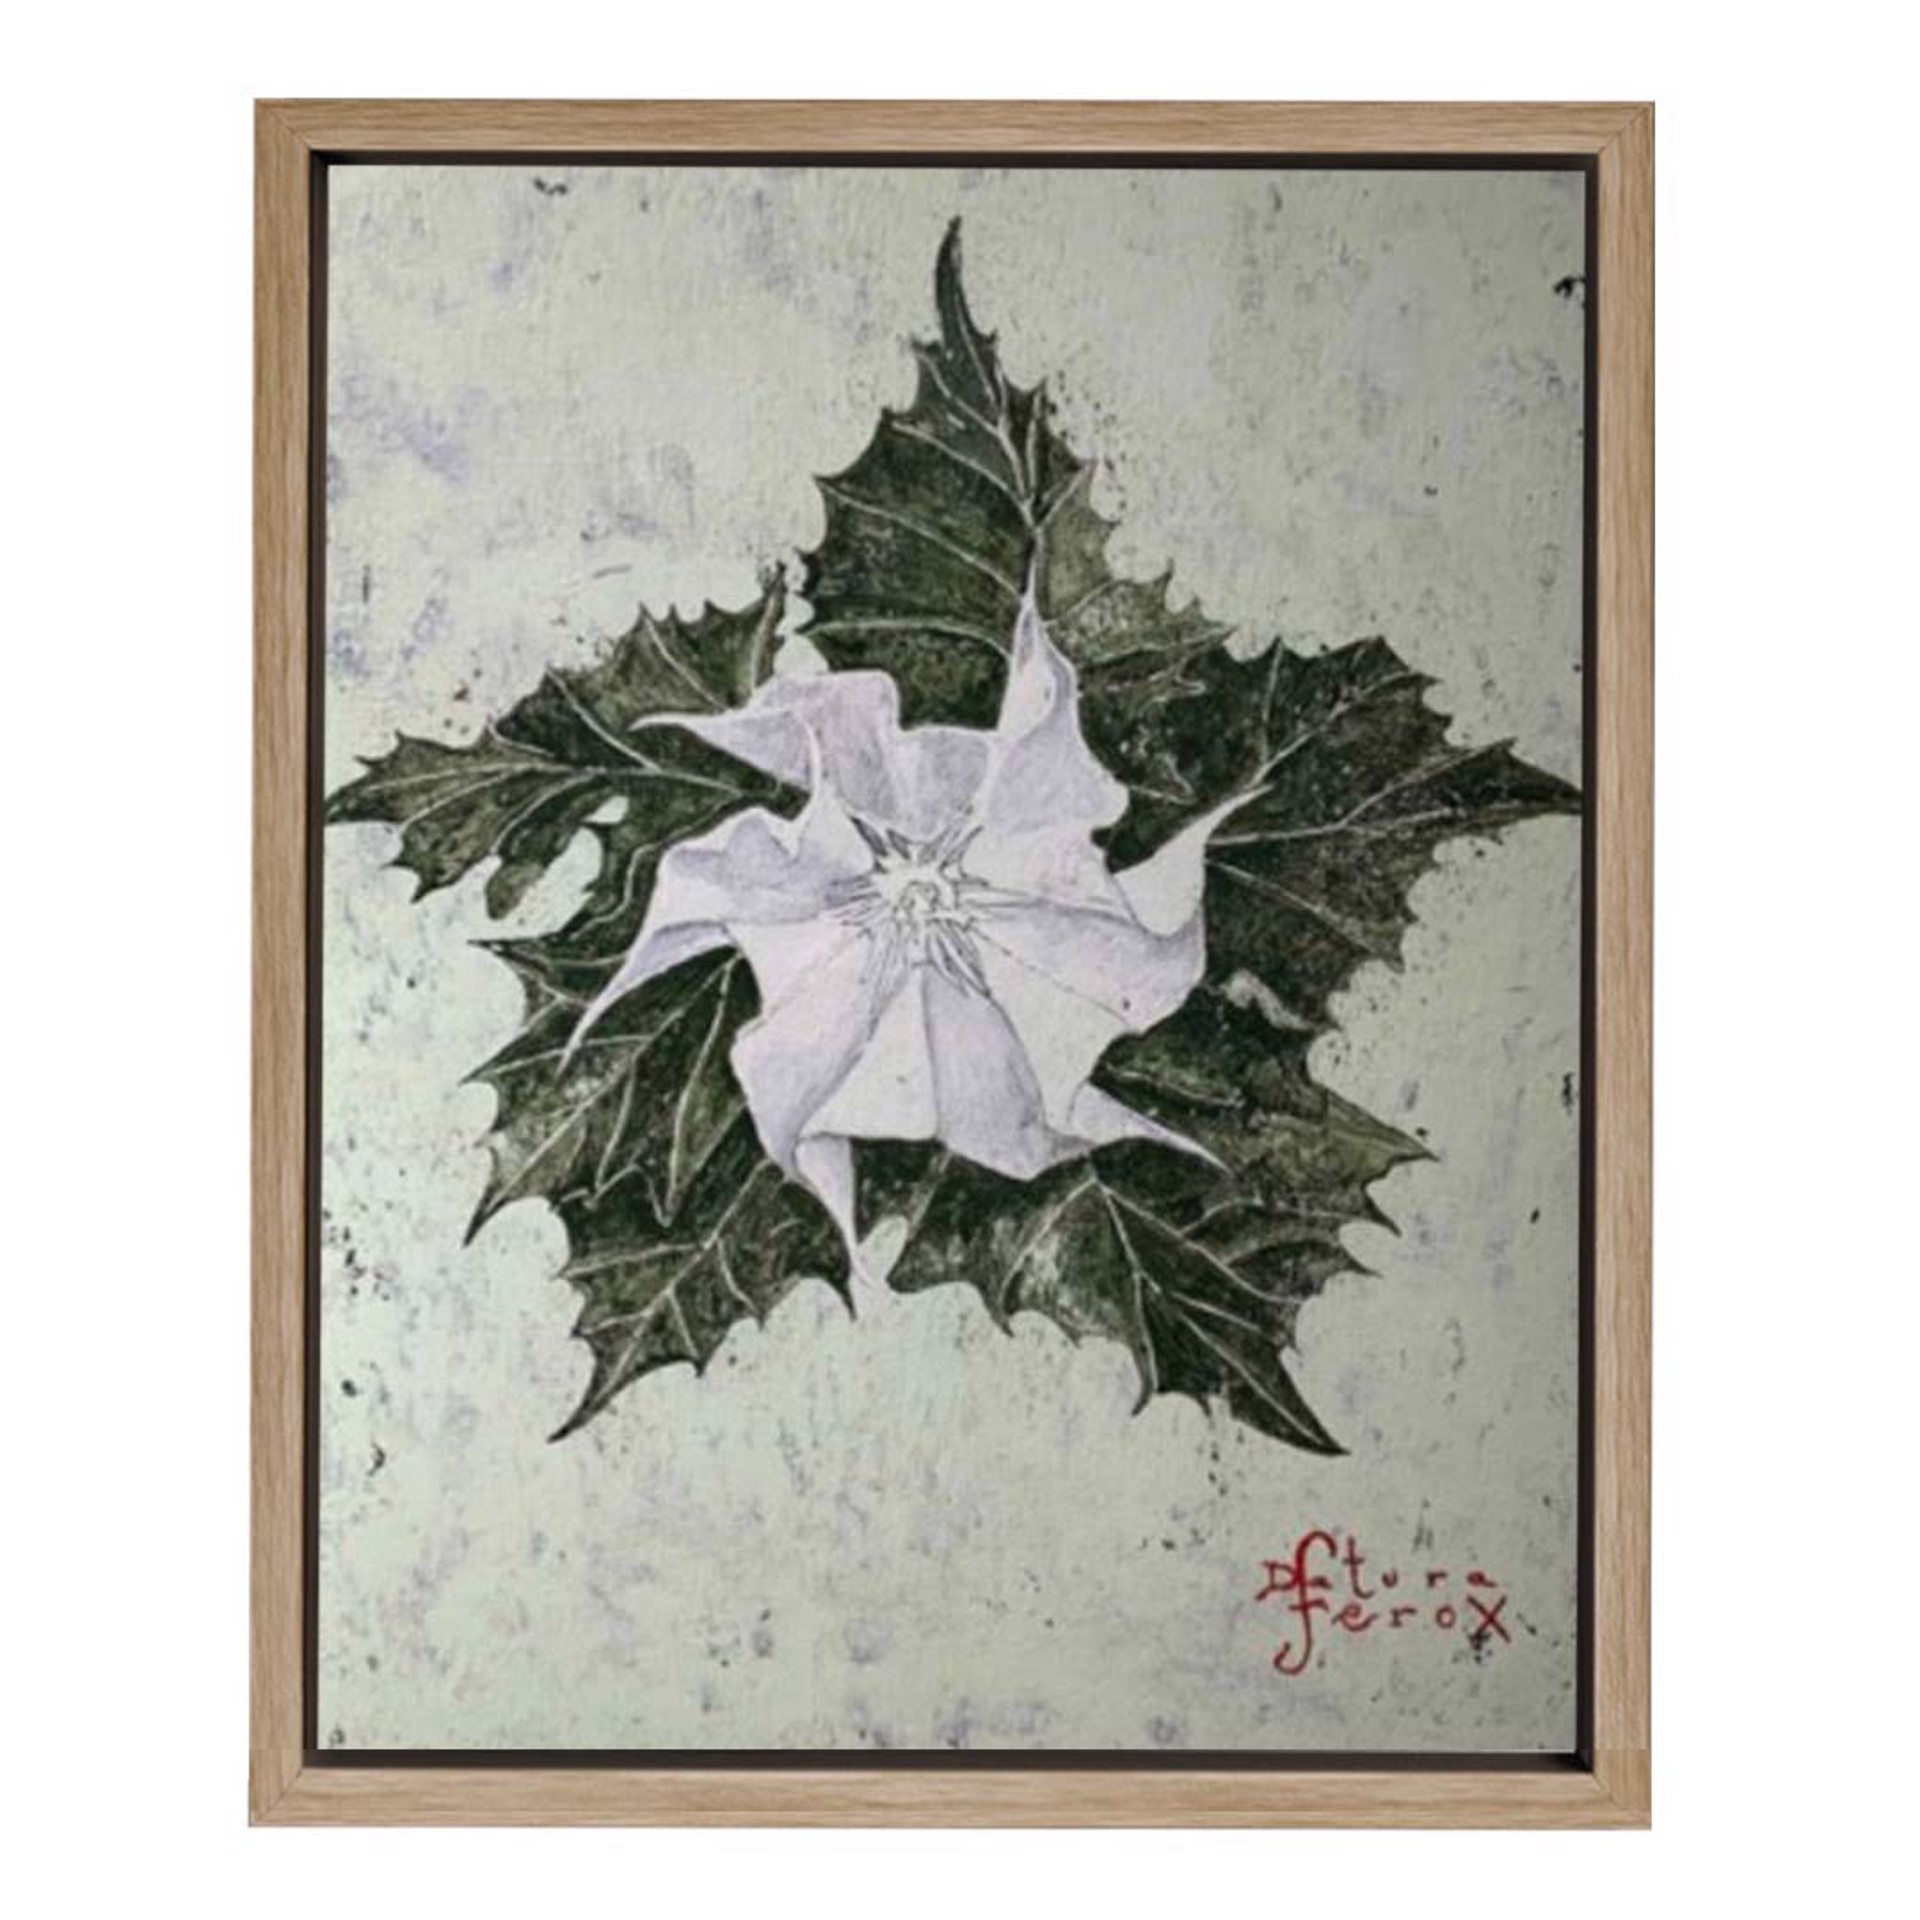 Datura Ferox by Dominique Rousserie by St Barth Artwork